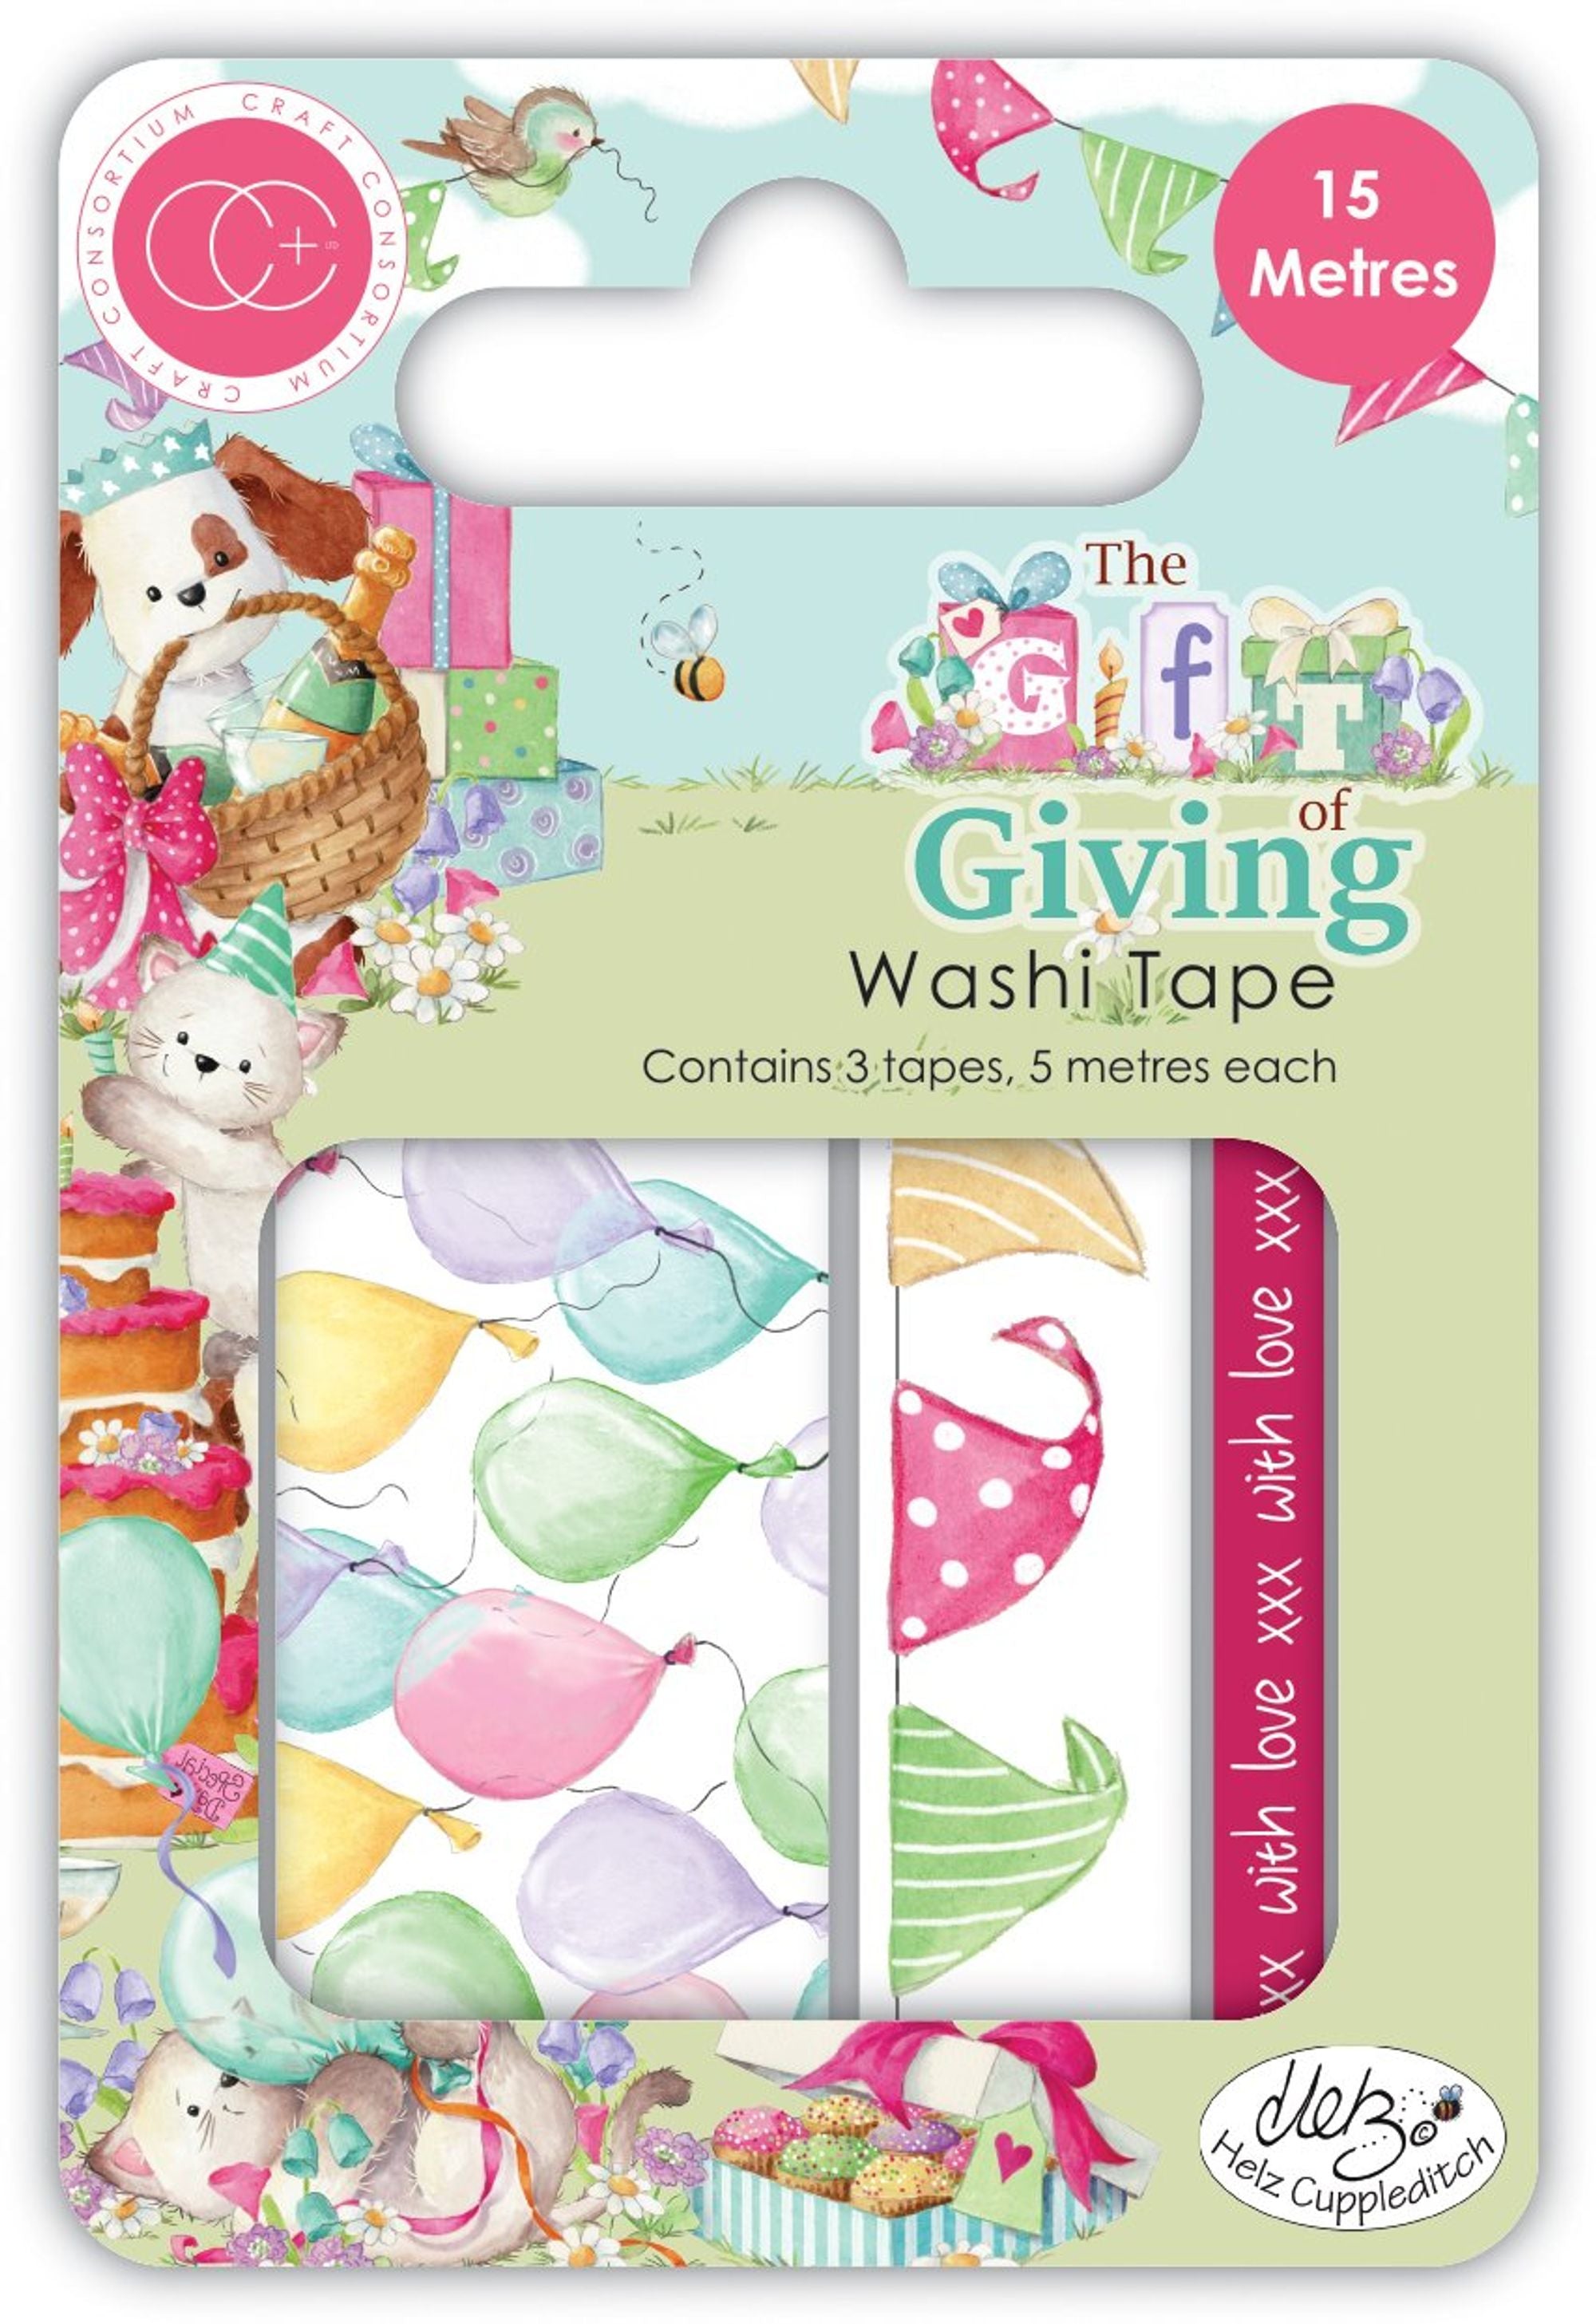 The Gift of Giving Washi Tape